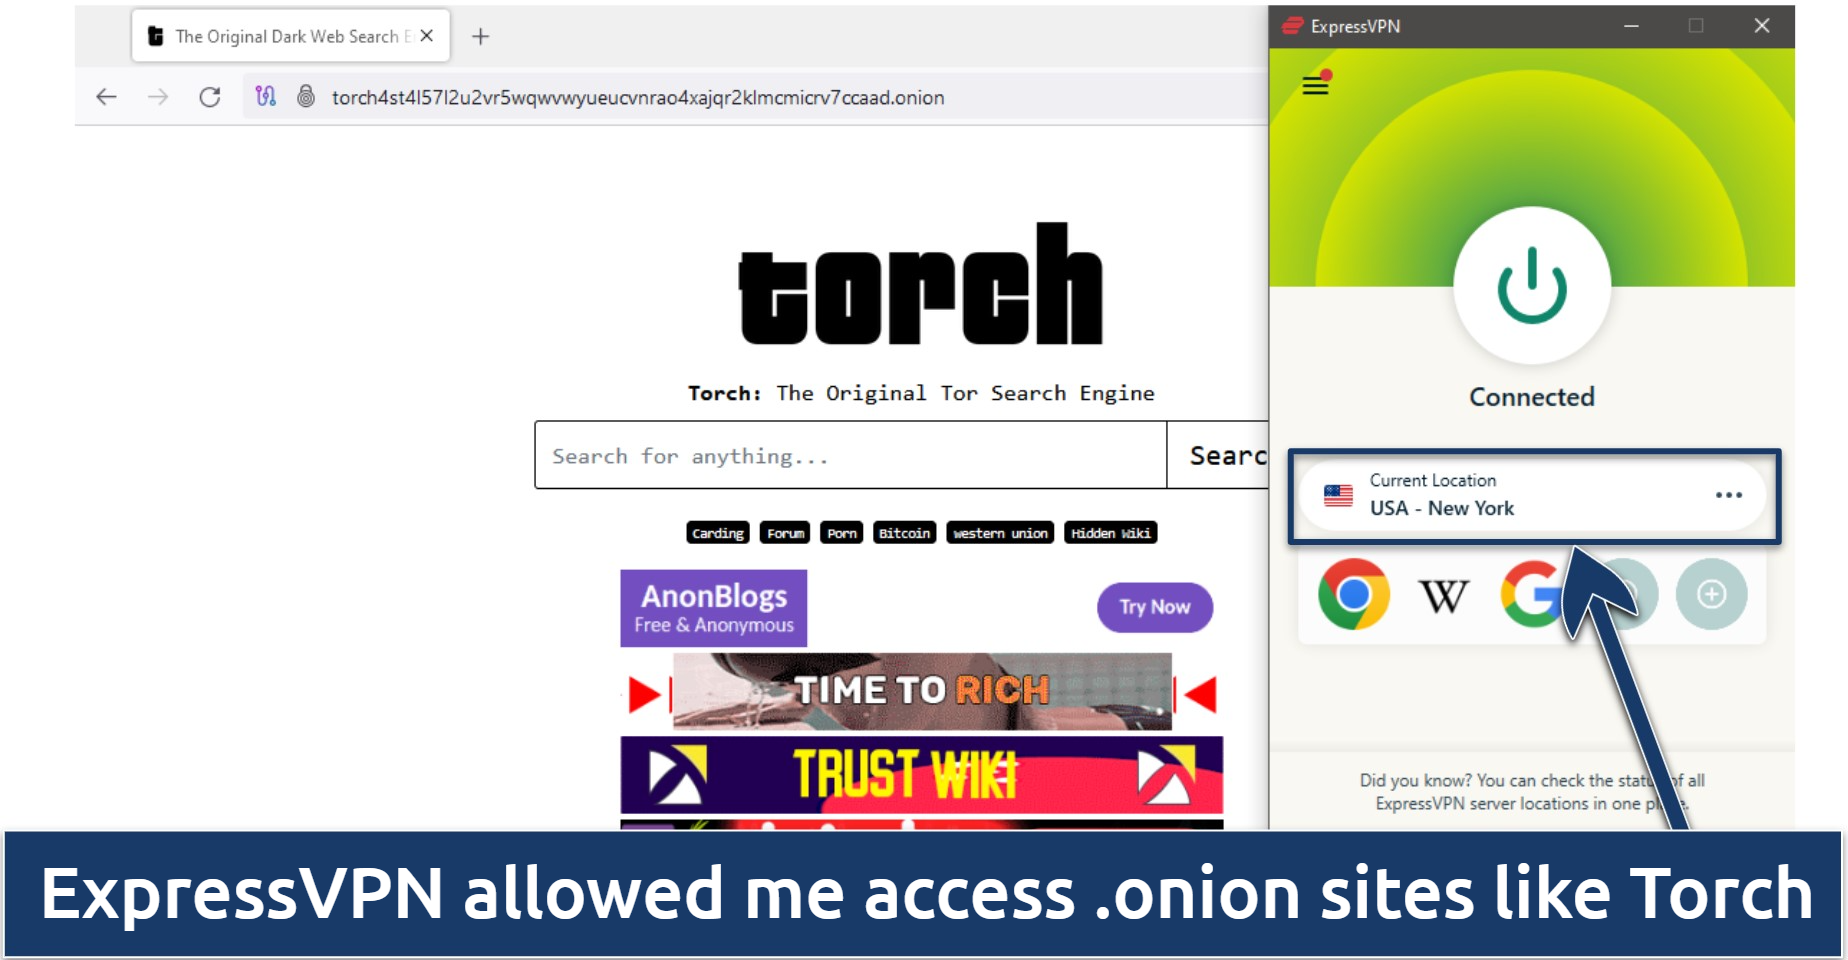 Screenshot of Torch search engine on Tor, with ExpressVPN connected to New York